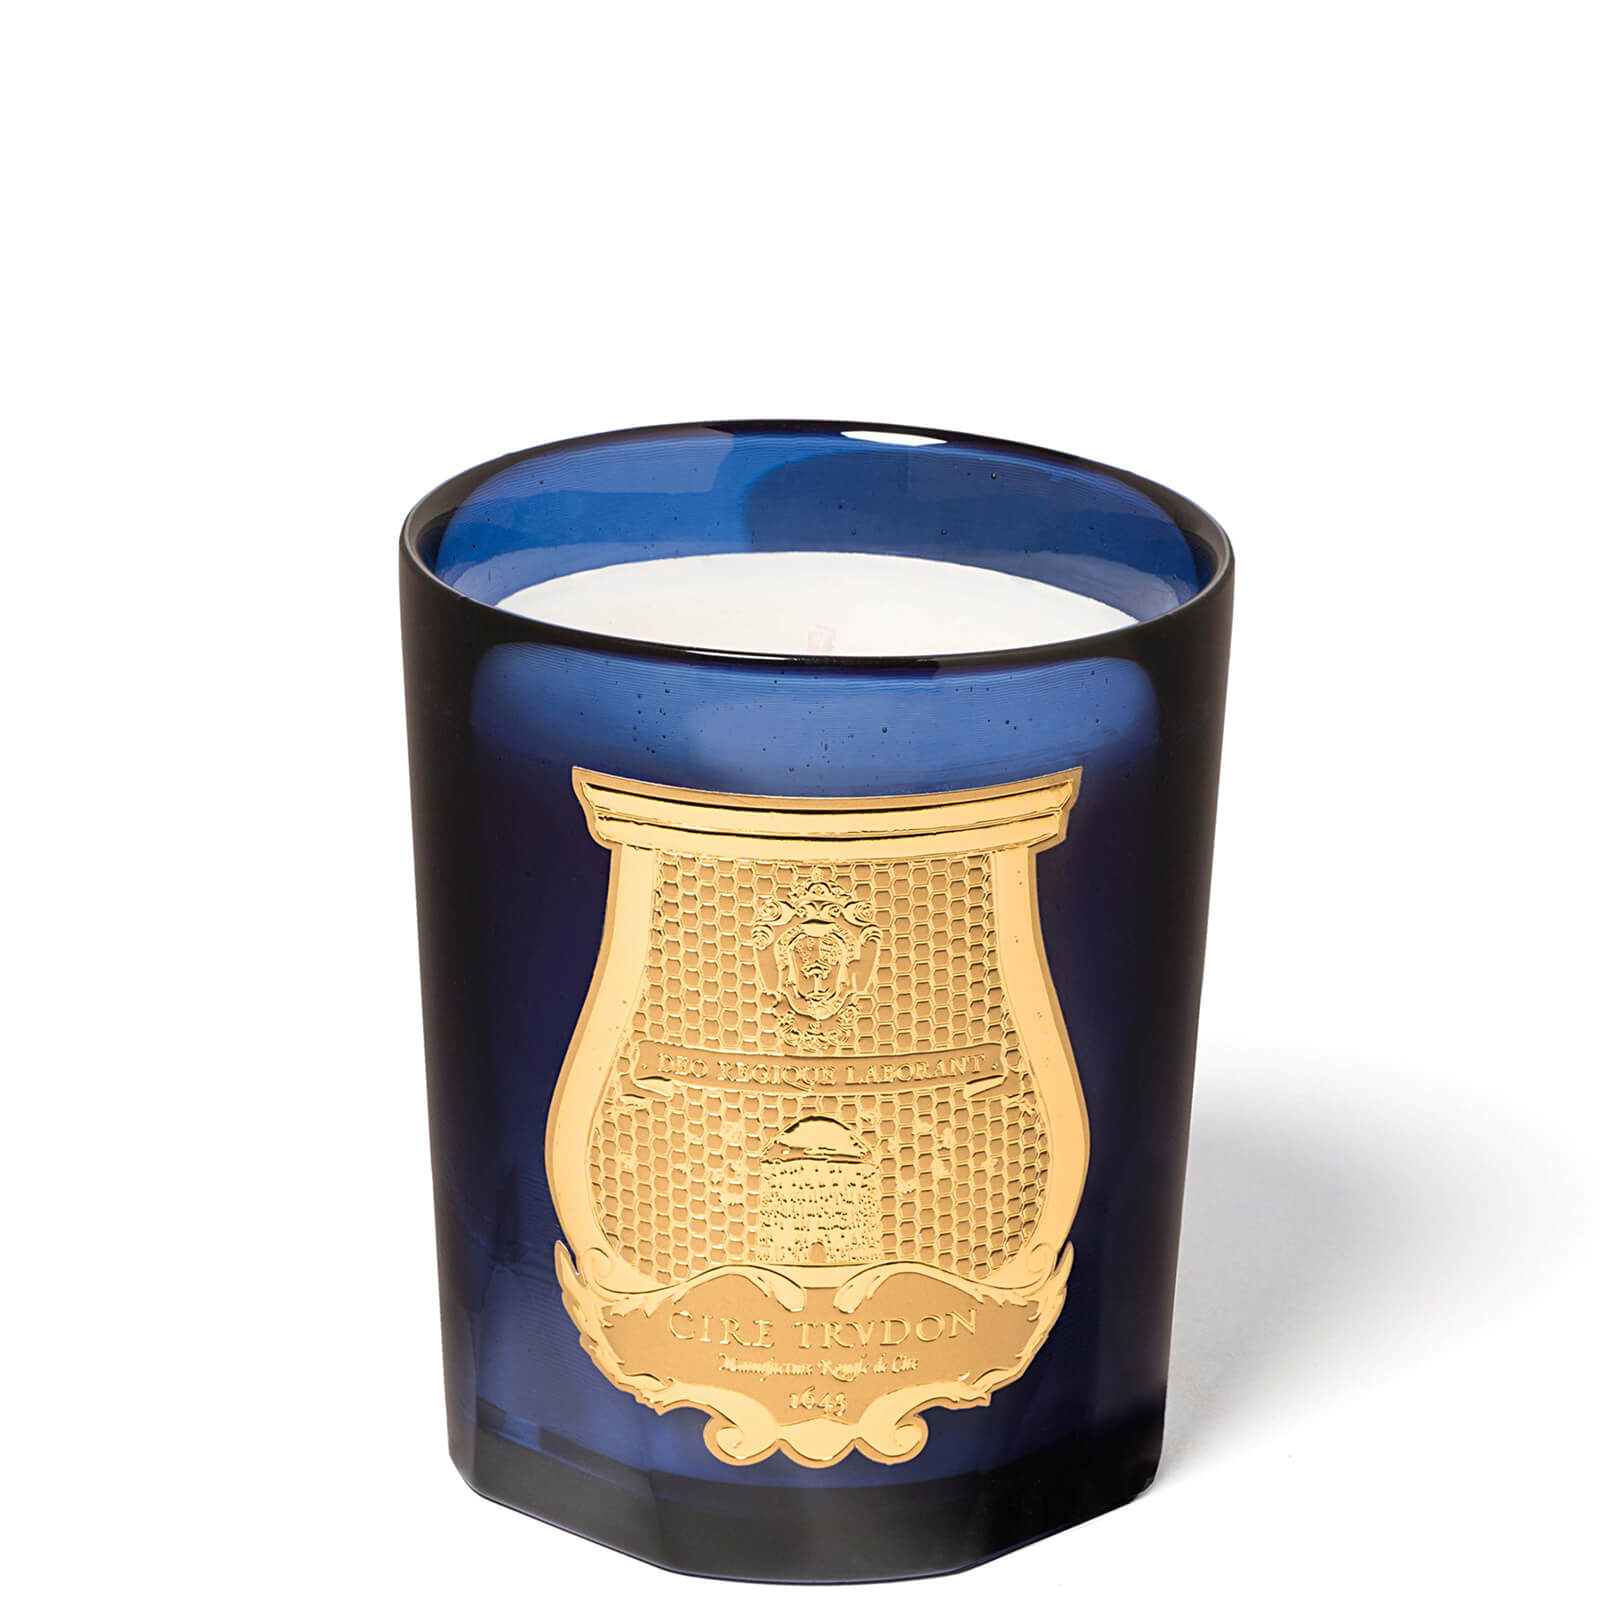 Trudon Les Belles Matières Reggio Limited Collection Candle In Blue / Gold